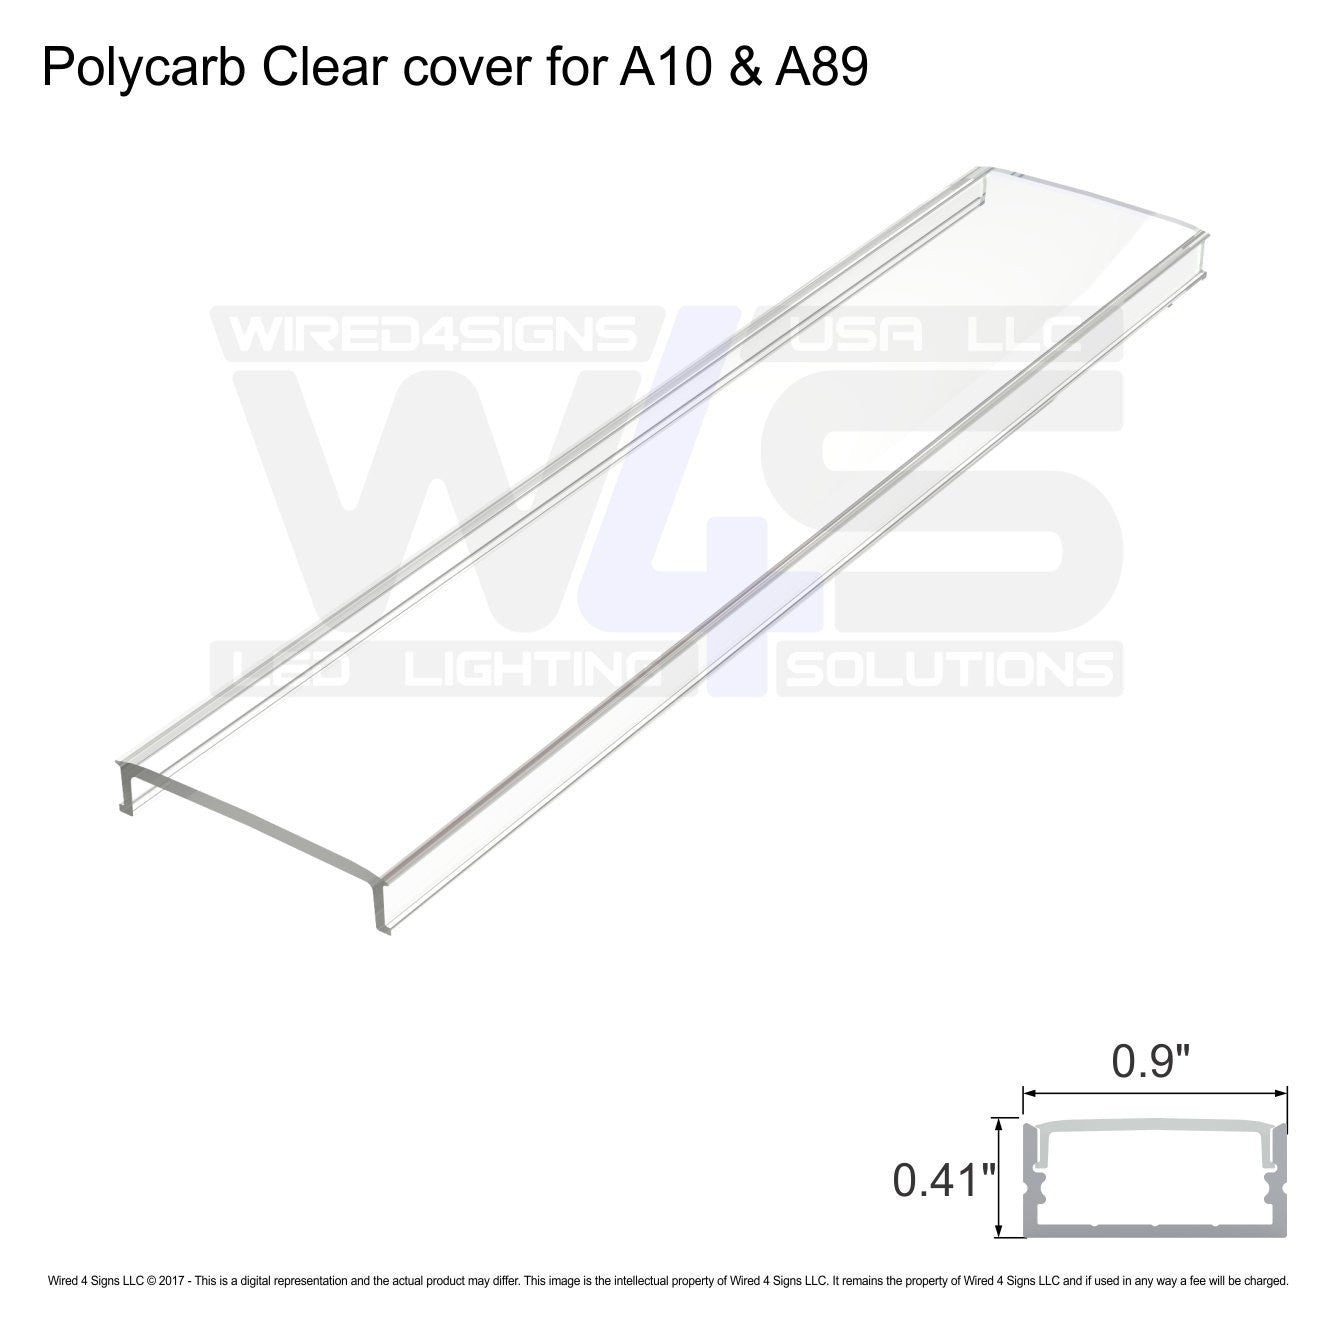 Polycarb Clear cover for  A10 & A89 - Dif4 (2meter/6.56ft length)